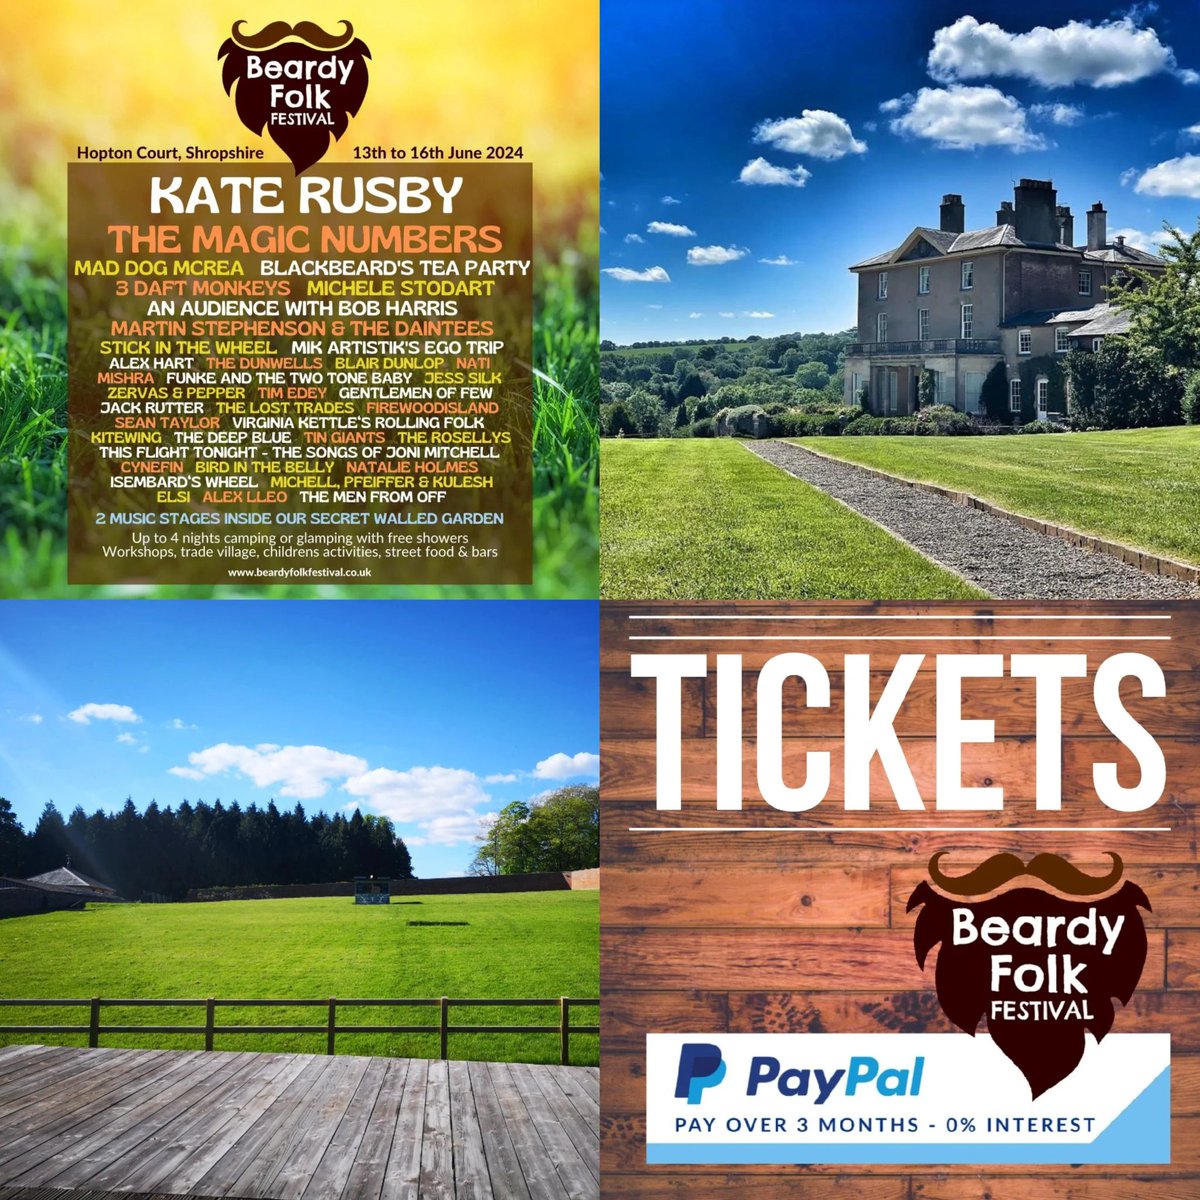 TICKET PRICES GO UP FOR THE LAST TIME ⬆️ on Monday 1st May, so book your place today 👍 PAY IN 3️⃣ You have the option to pay in 3 with PayPal. This means you can spread the cost of tickets etc over 3️⃣ INTEREST FREE payments ✅✅✅ #beardyfolkfestival #shropshire #musicfestival